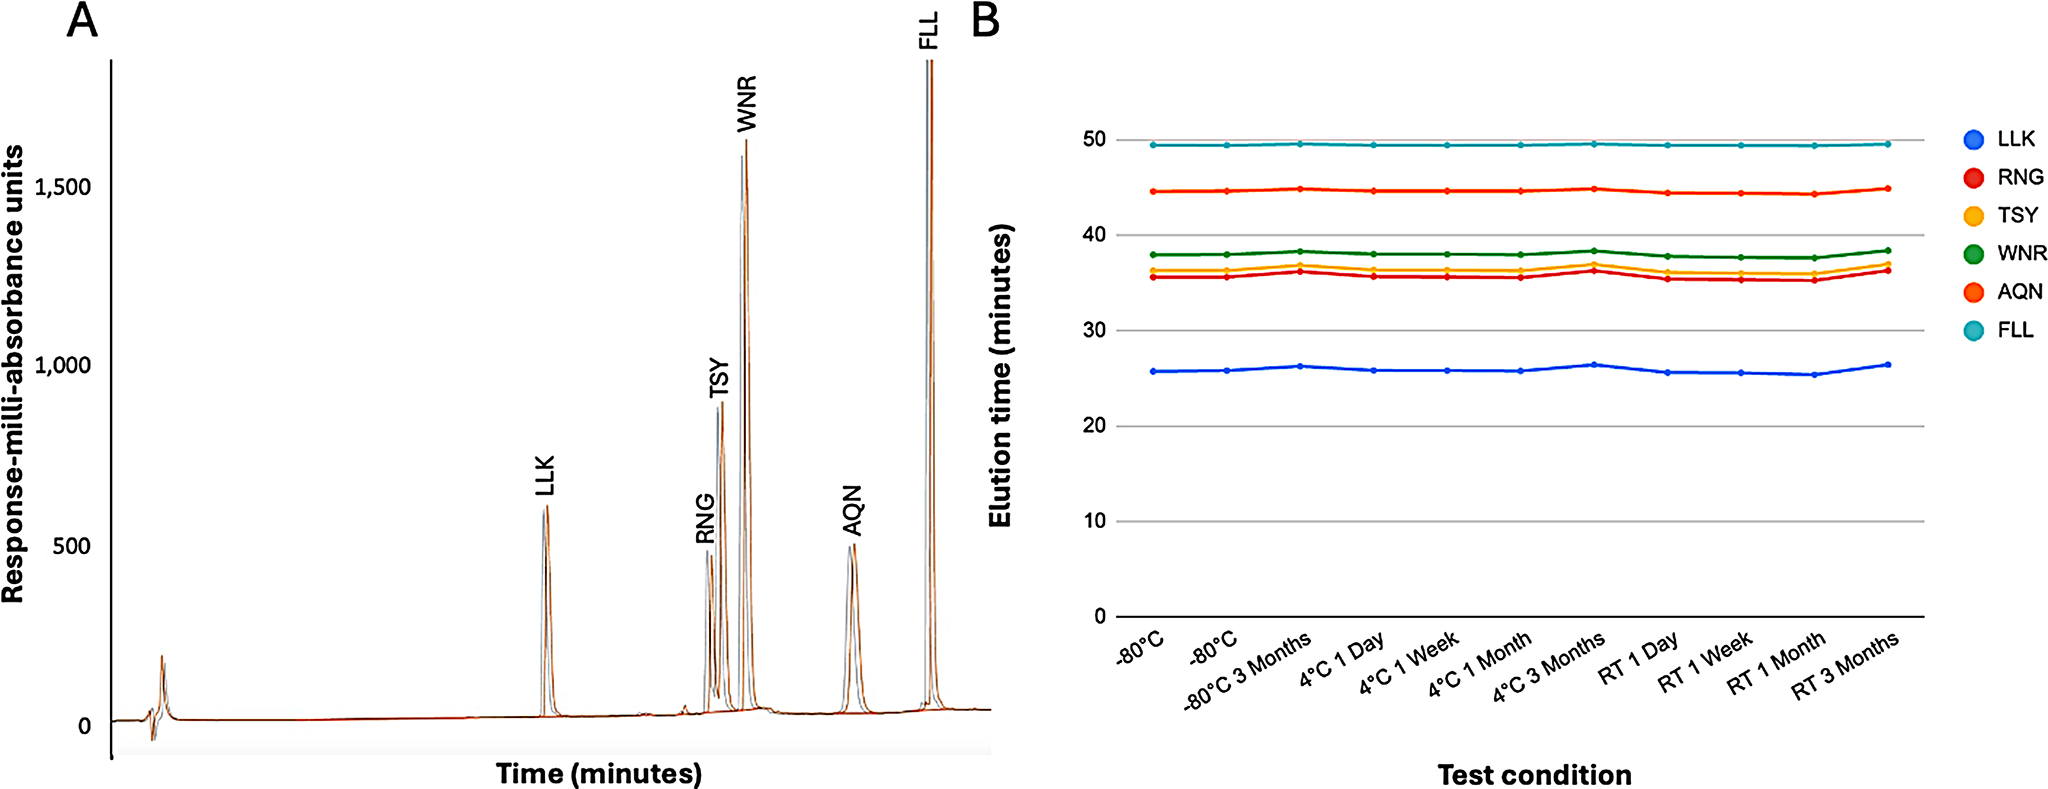 Stability of Multi-Peptide Vaccines in Conditions Enabling Accessibility in Limited Resource Settings